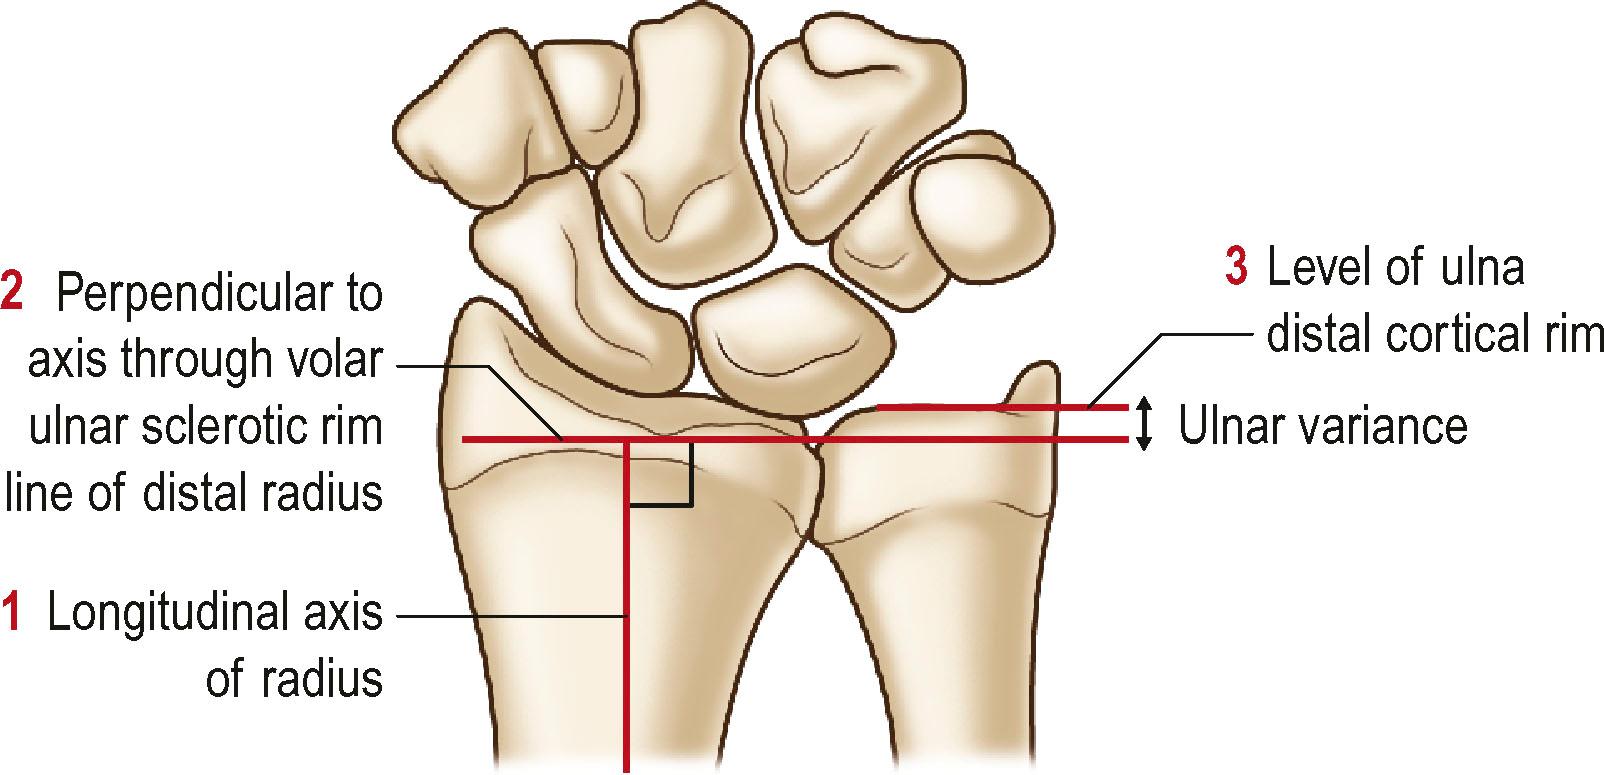 Figure 3.17, Ulnar variance is measured on a true neutral posteroanterior view of the wrist. First (1) a line along the longitudinal axis of the radius is drawn. Next (2) a line perpendicular to this line through the volar ulnar sclerotic rim of the distal radius is drawn. Finally (3) a line parallel to this second line at the level of the distal cortical rim of the ulna is drawn. The distance between these two parallel lines is the ulnar variance.